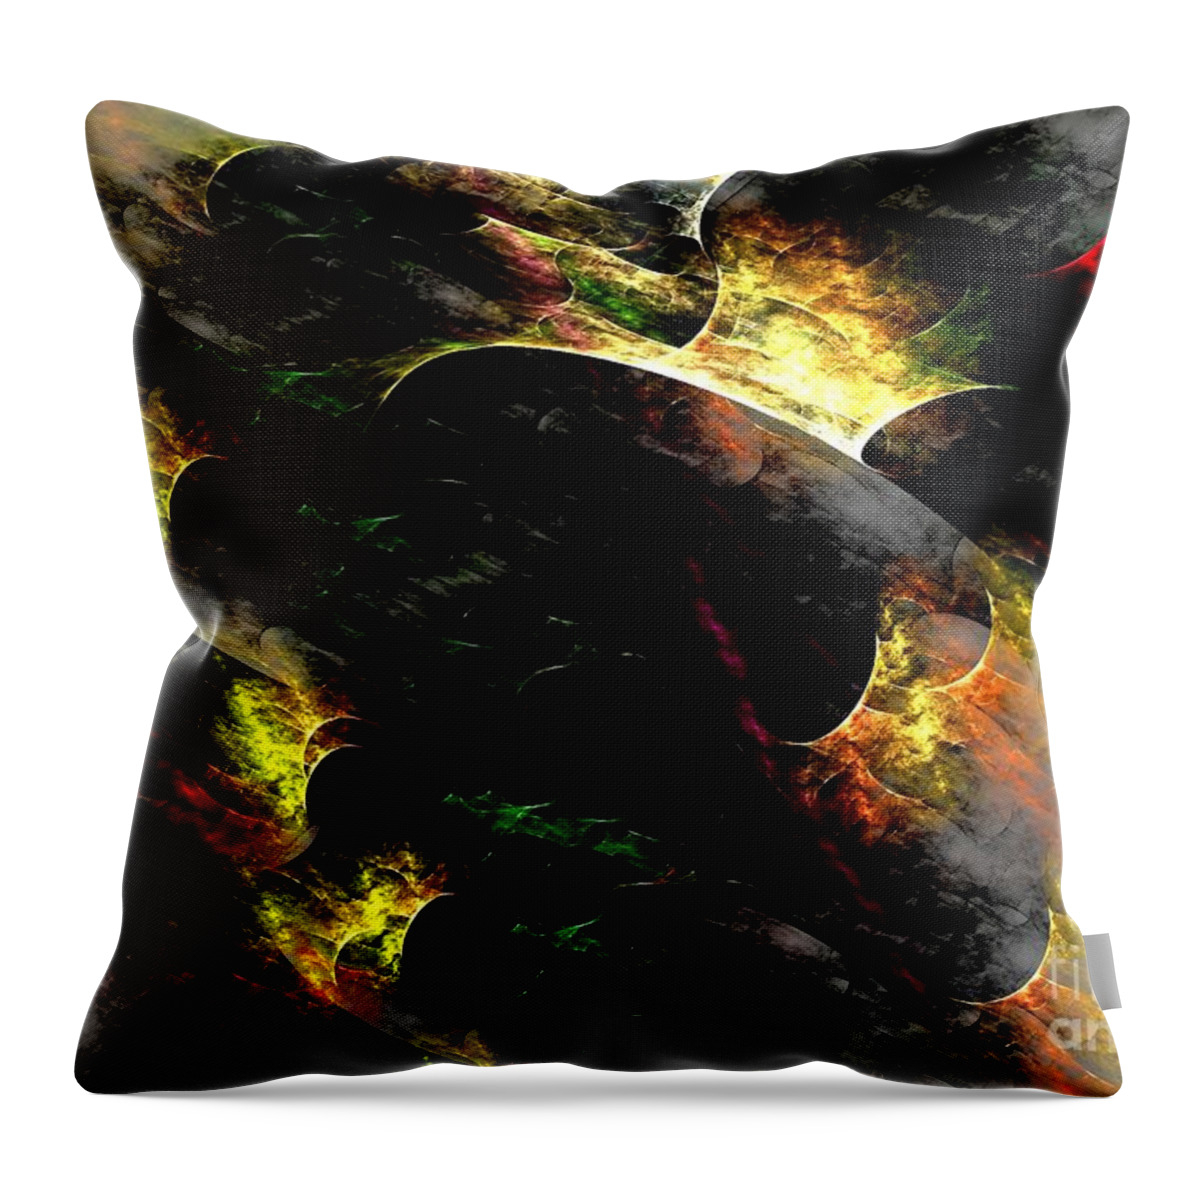 Fire Throw Pillow featuring the digital art Embers by Greg Moores